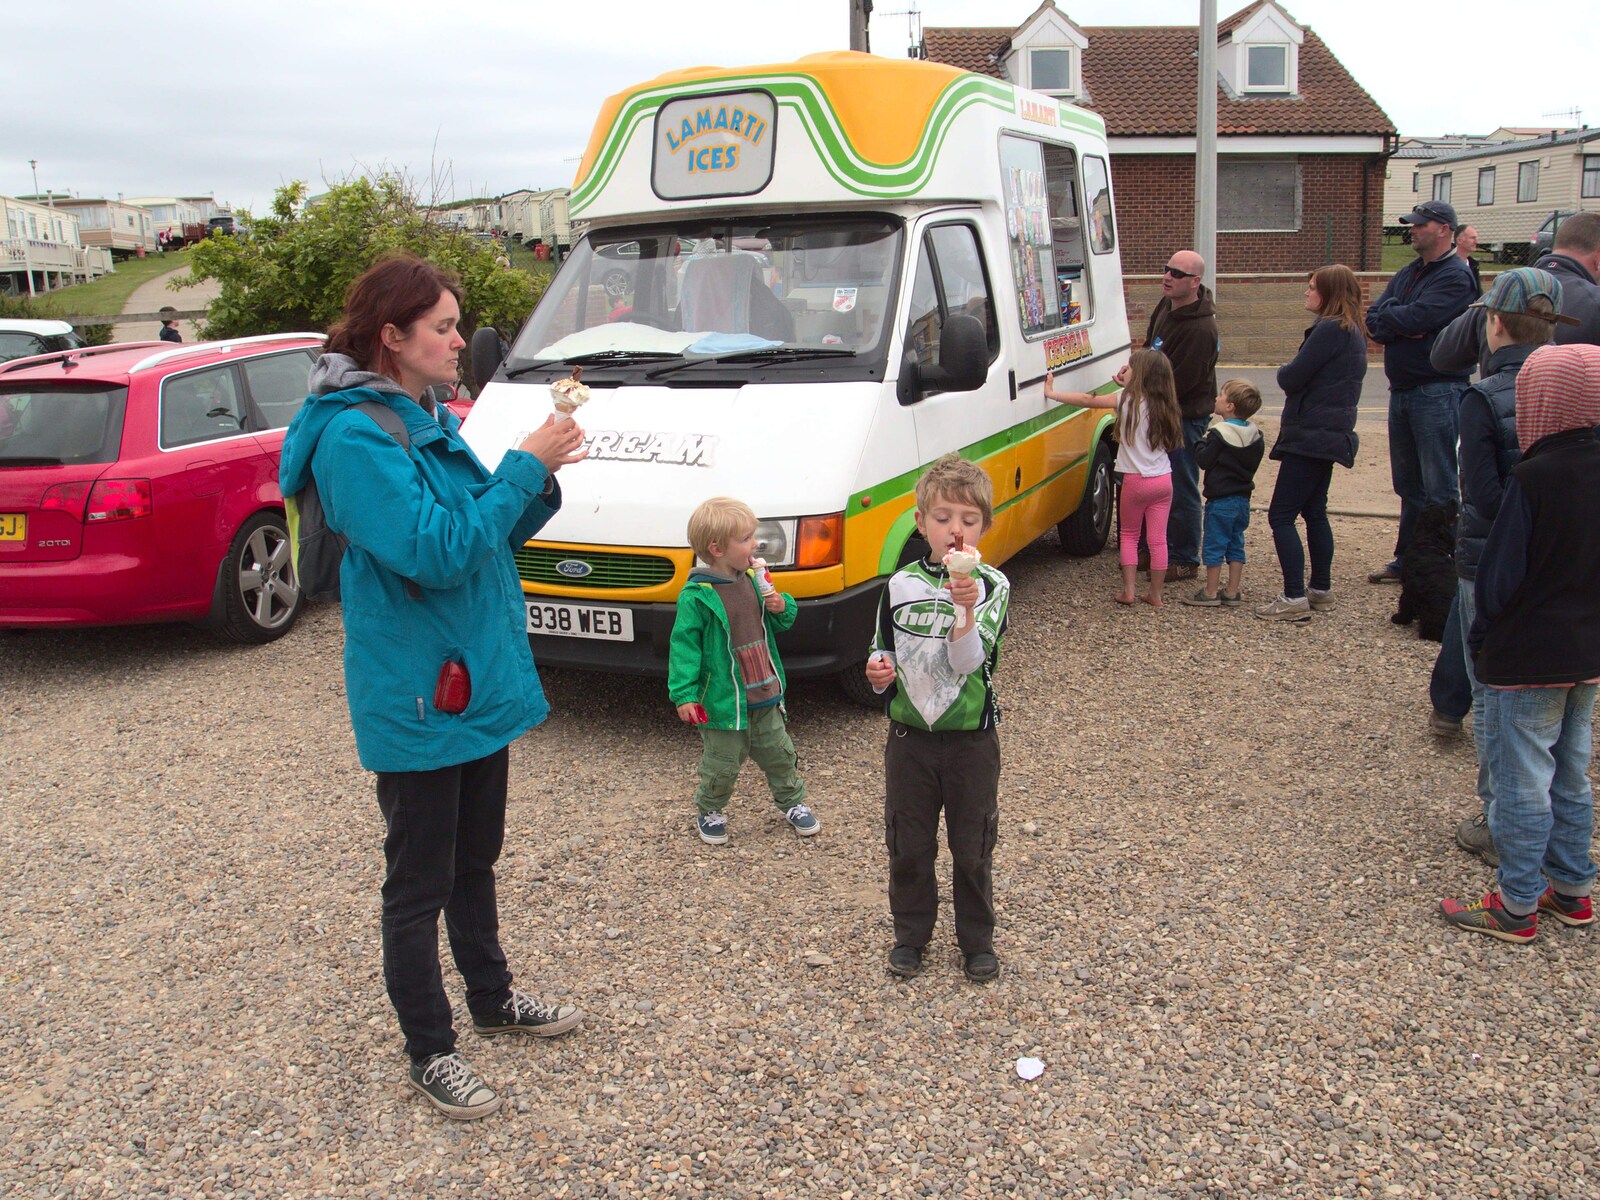 It's time for an ice cream from A Birthday Camping Trip, East Runton, North Norfolk - 26th May 2015